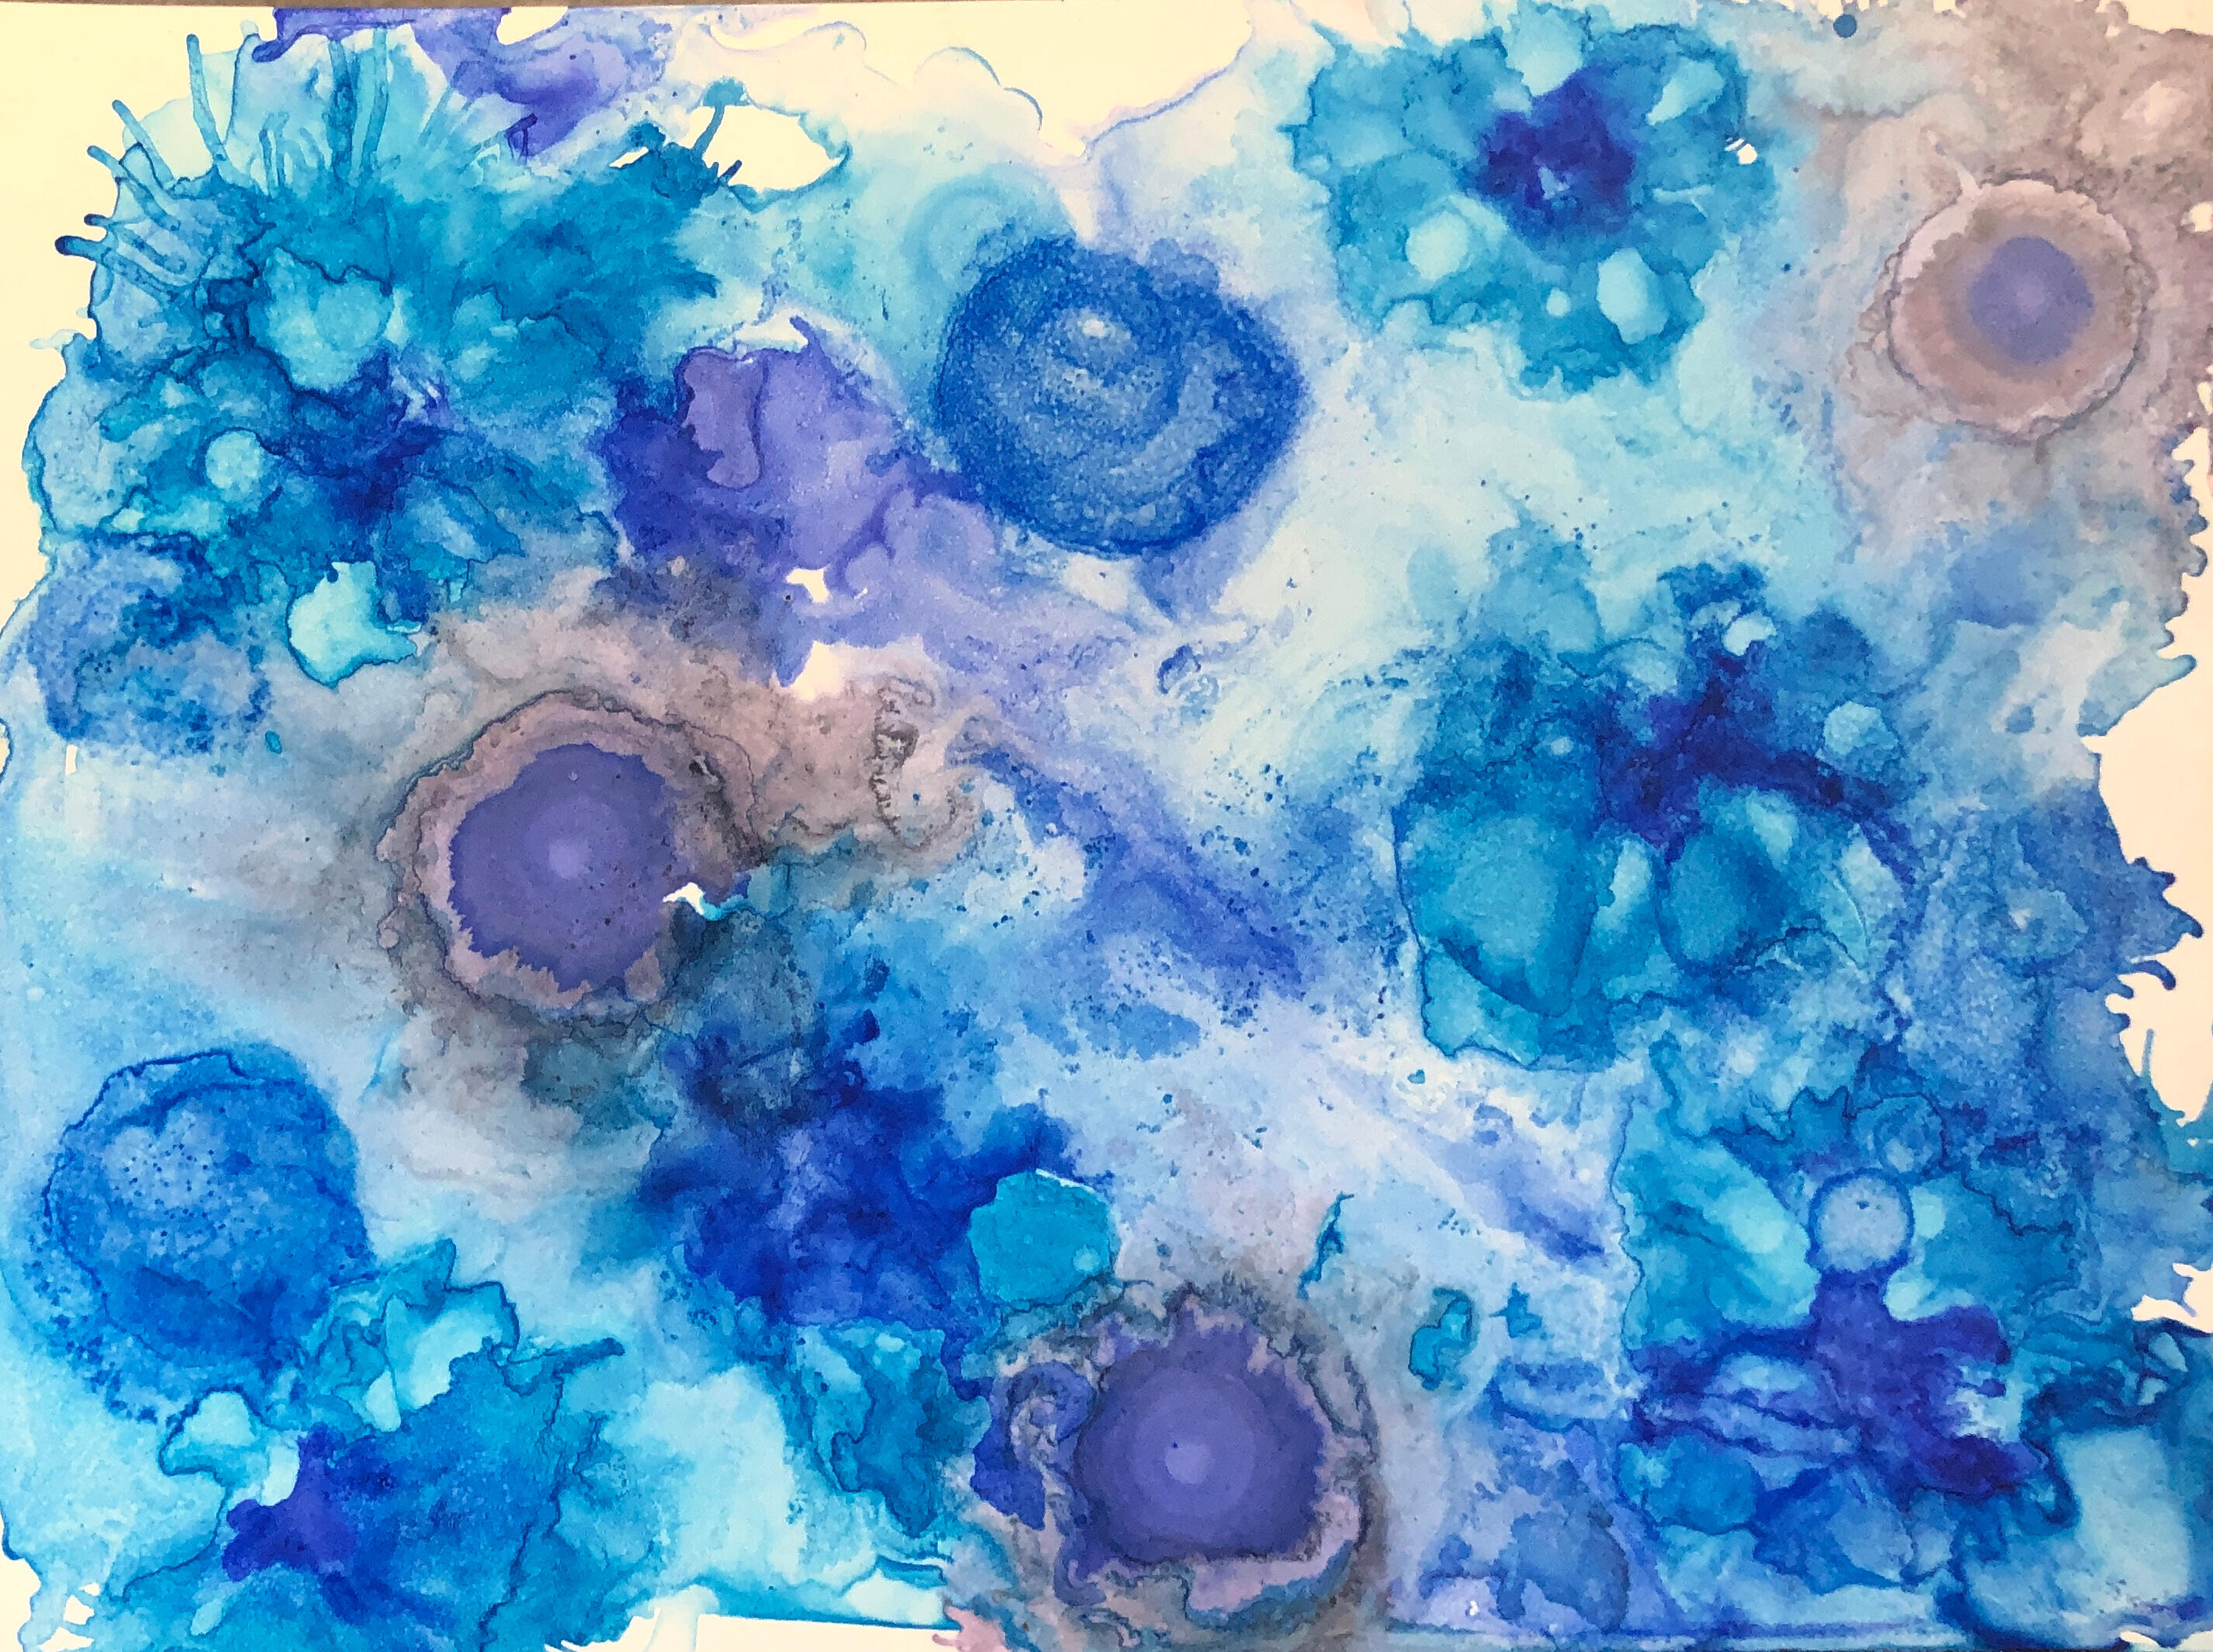 Alcohol Ink On Yupo Paper, 17 inches diameter in a 21x21 frame. :  r/AbstractArt